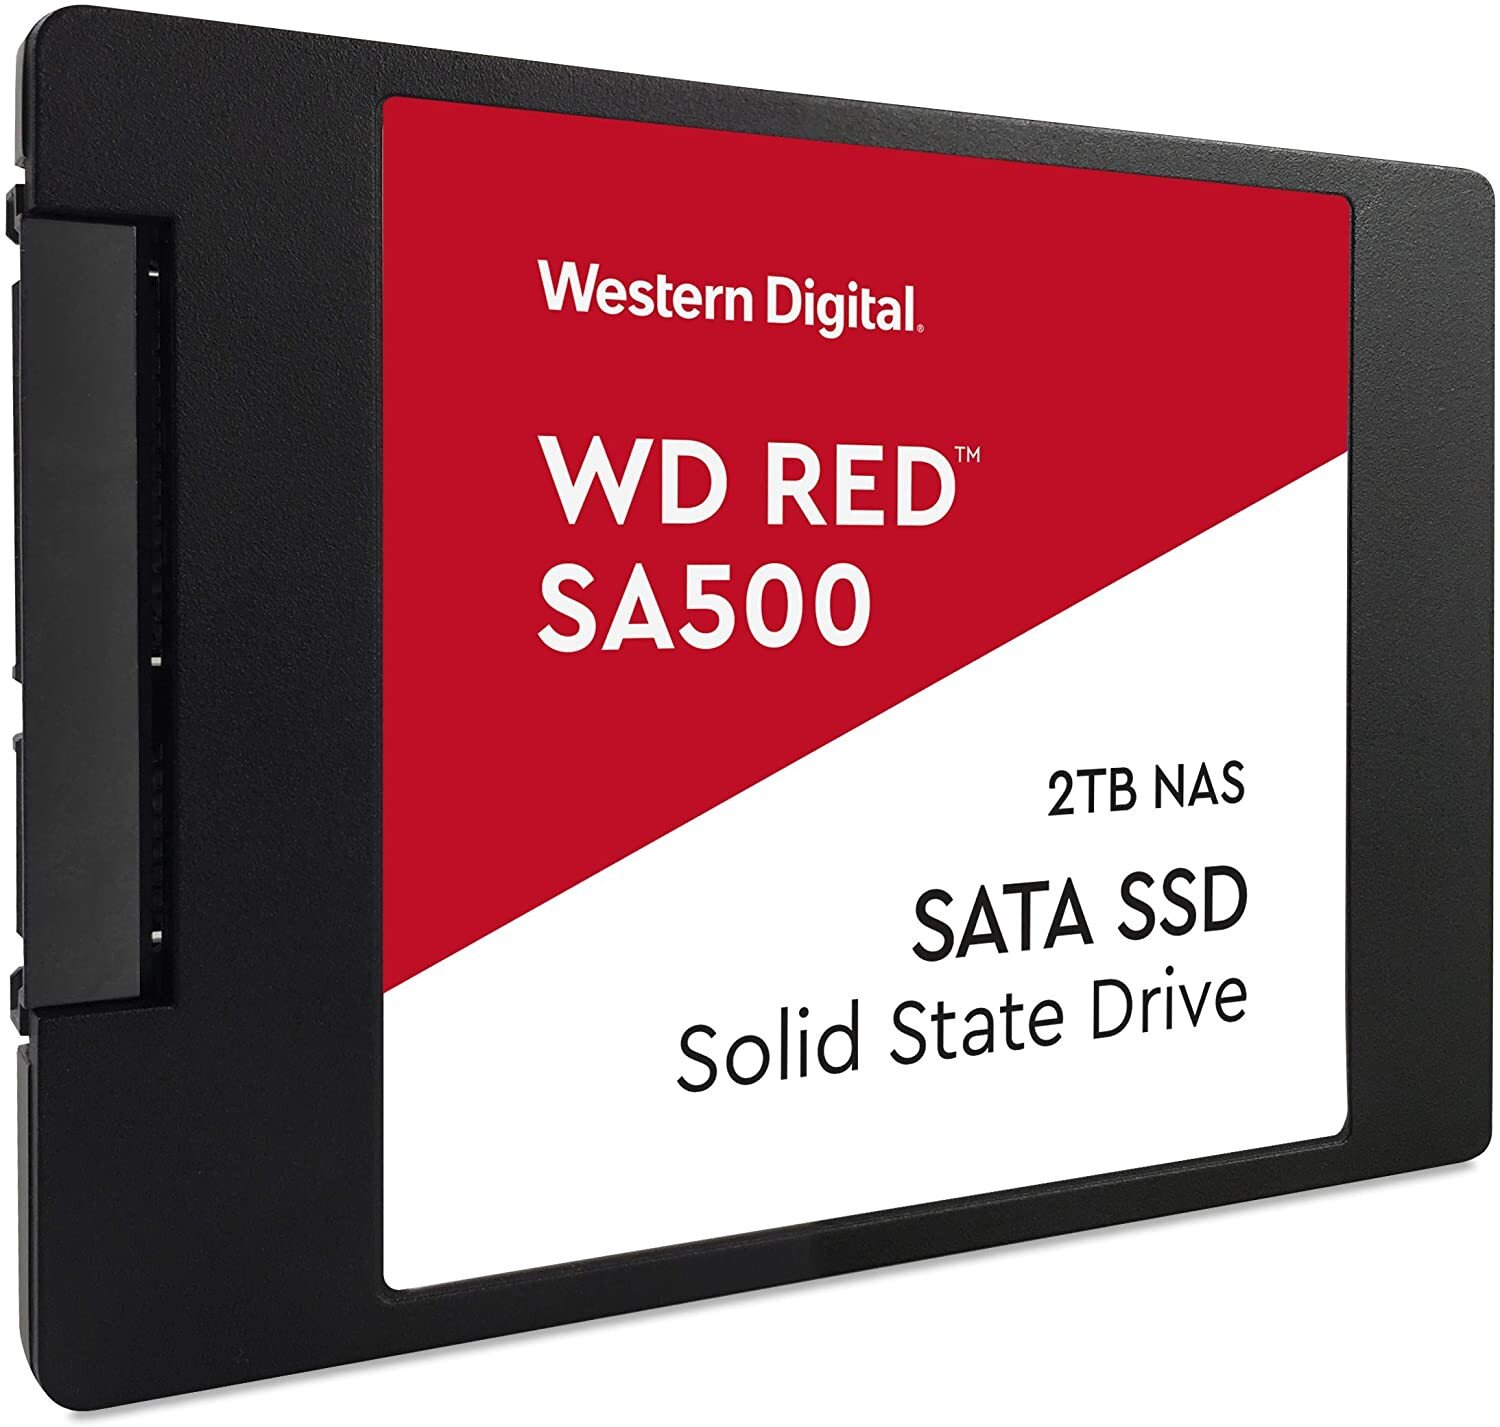 Buy WD Red SA500 NAS SATA SSD - 2.5 in - 2TB online Worldwide